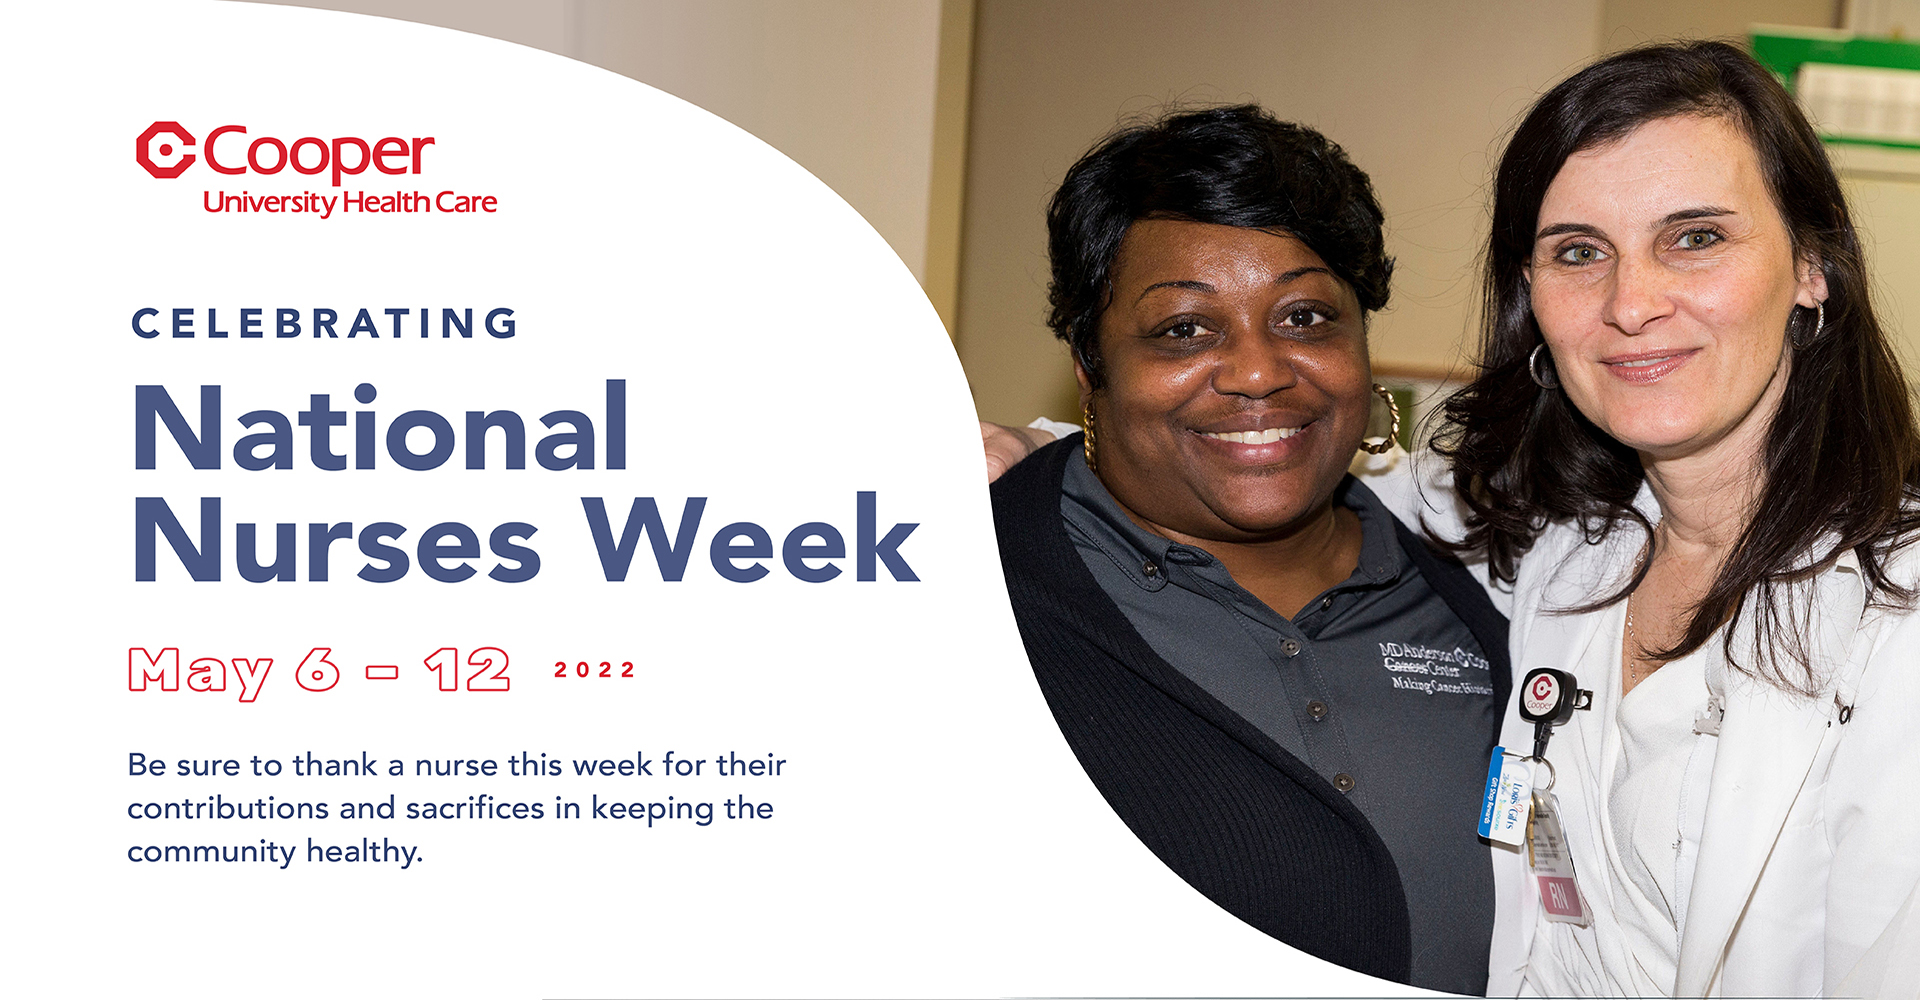 Two Cooper nurses featured with National Nurses Week message